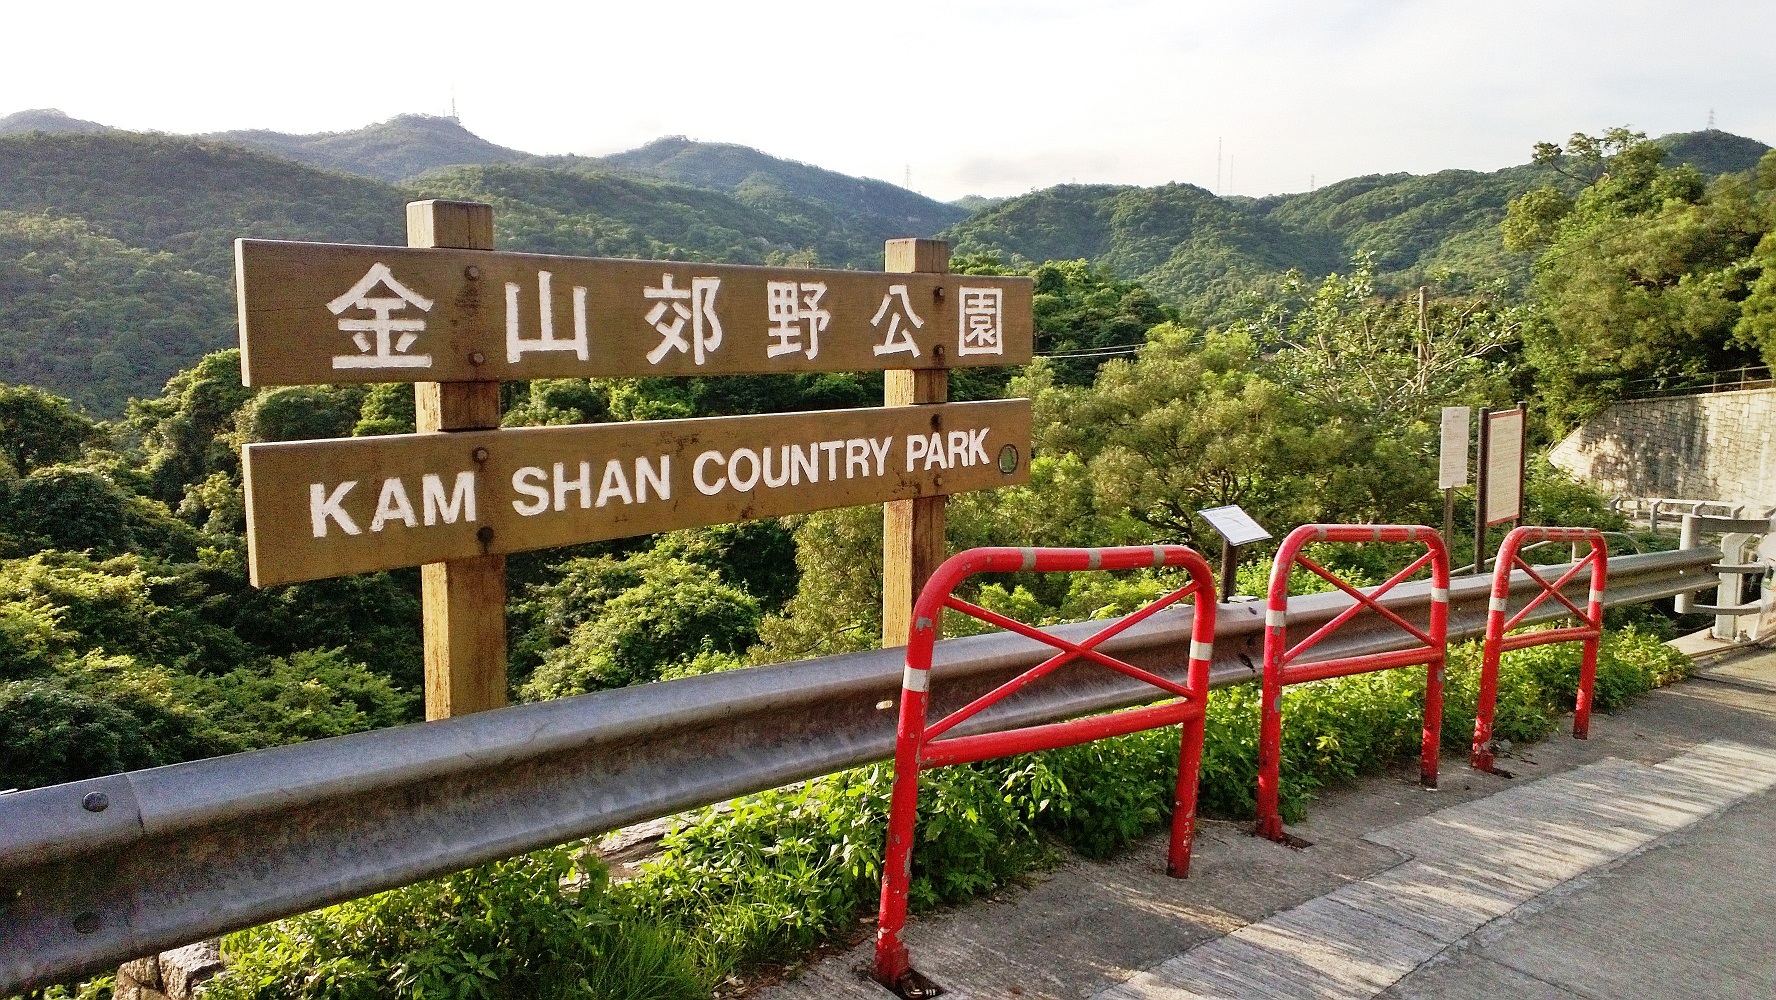 The entrance of Kam Shan Country Park